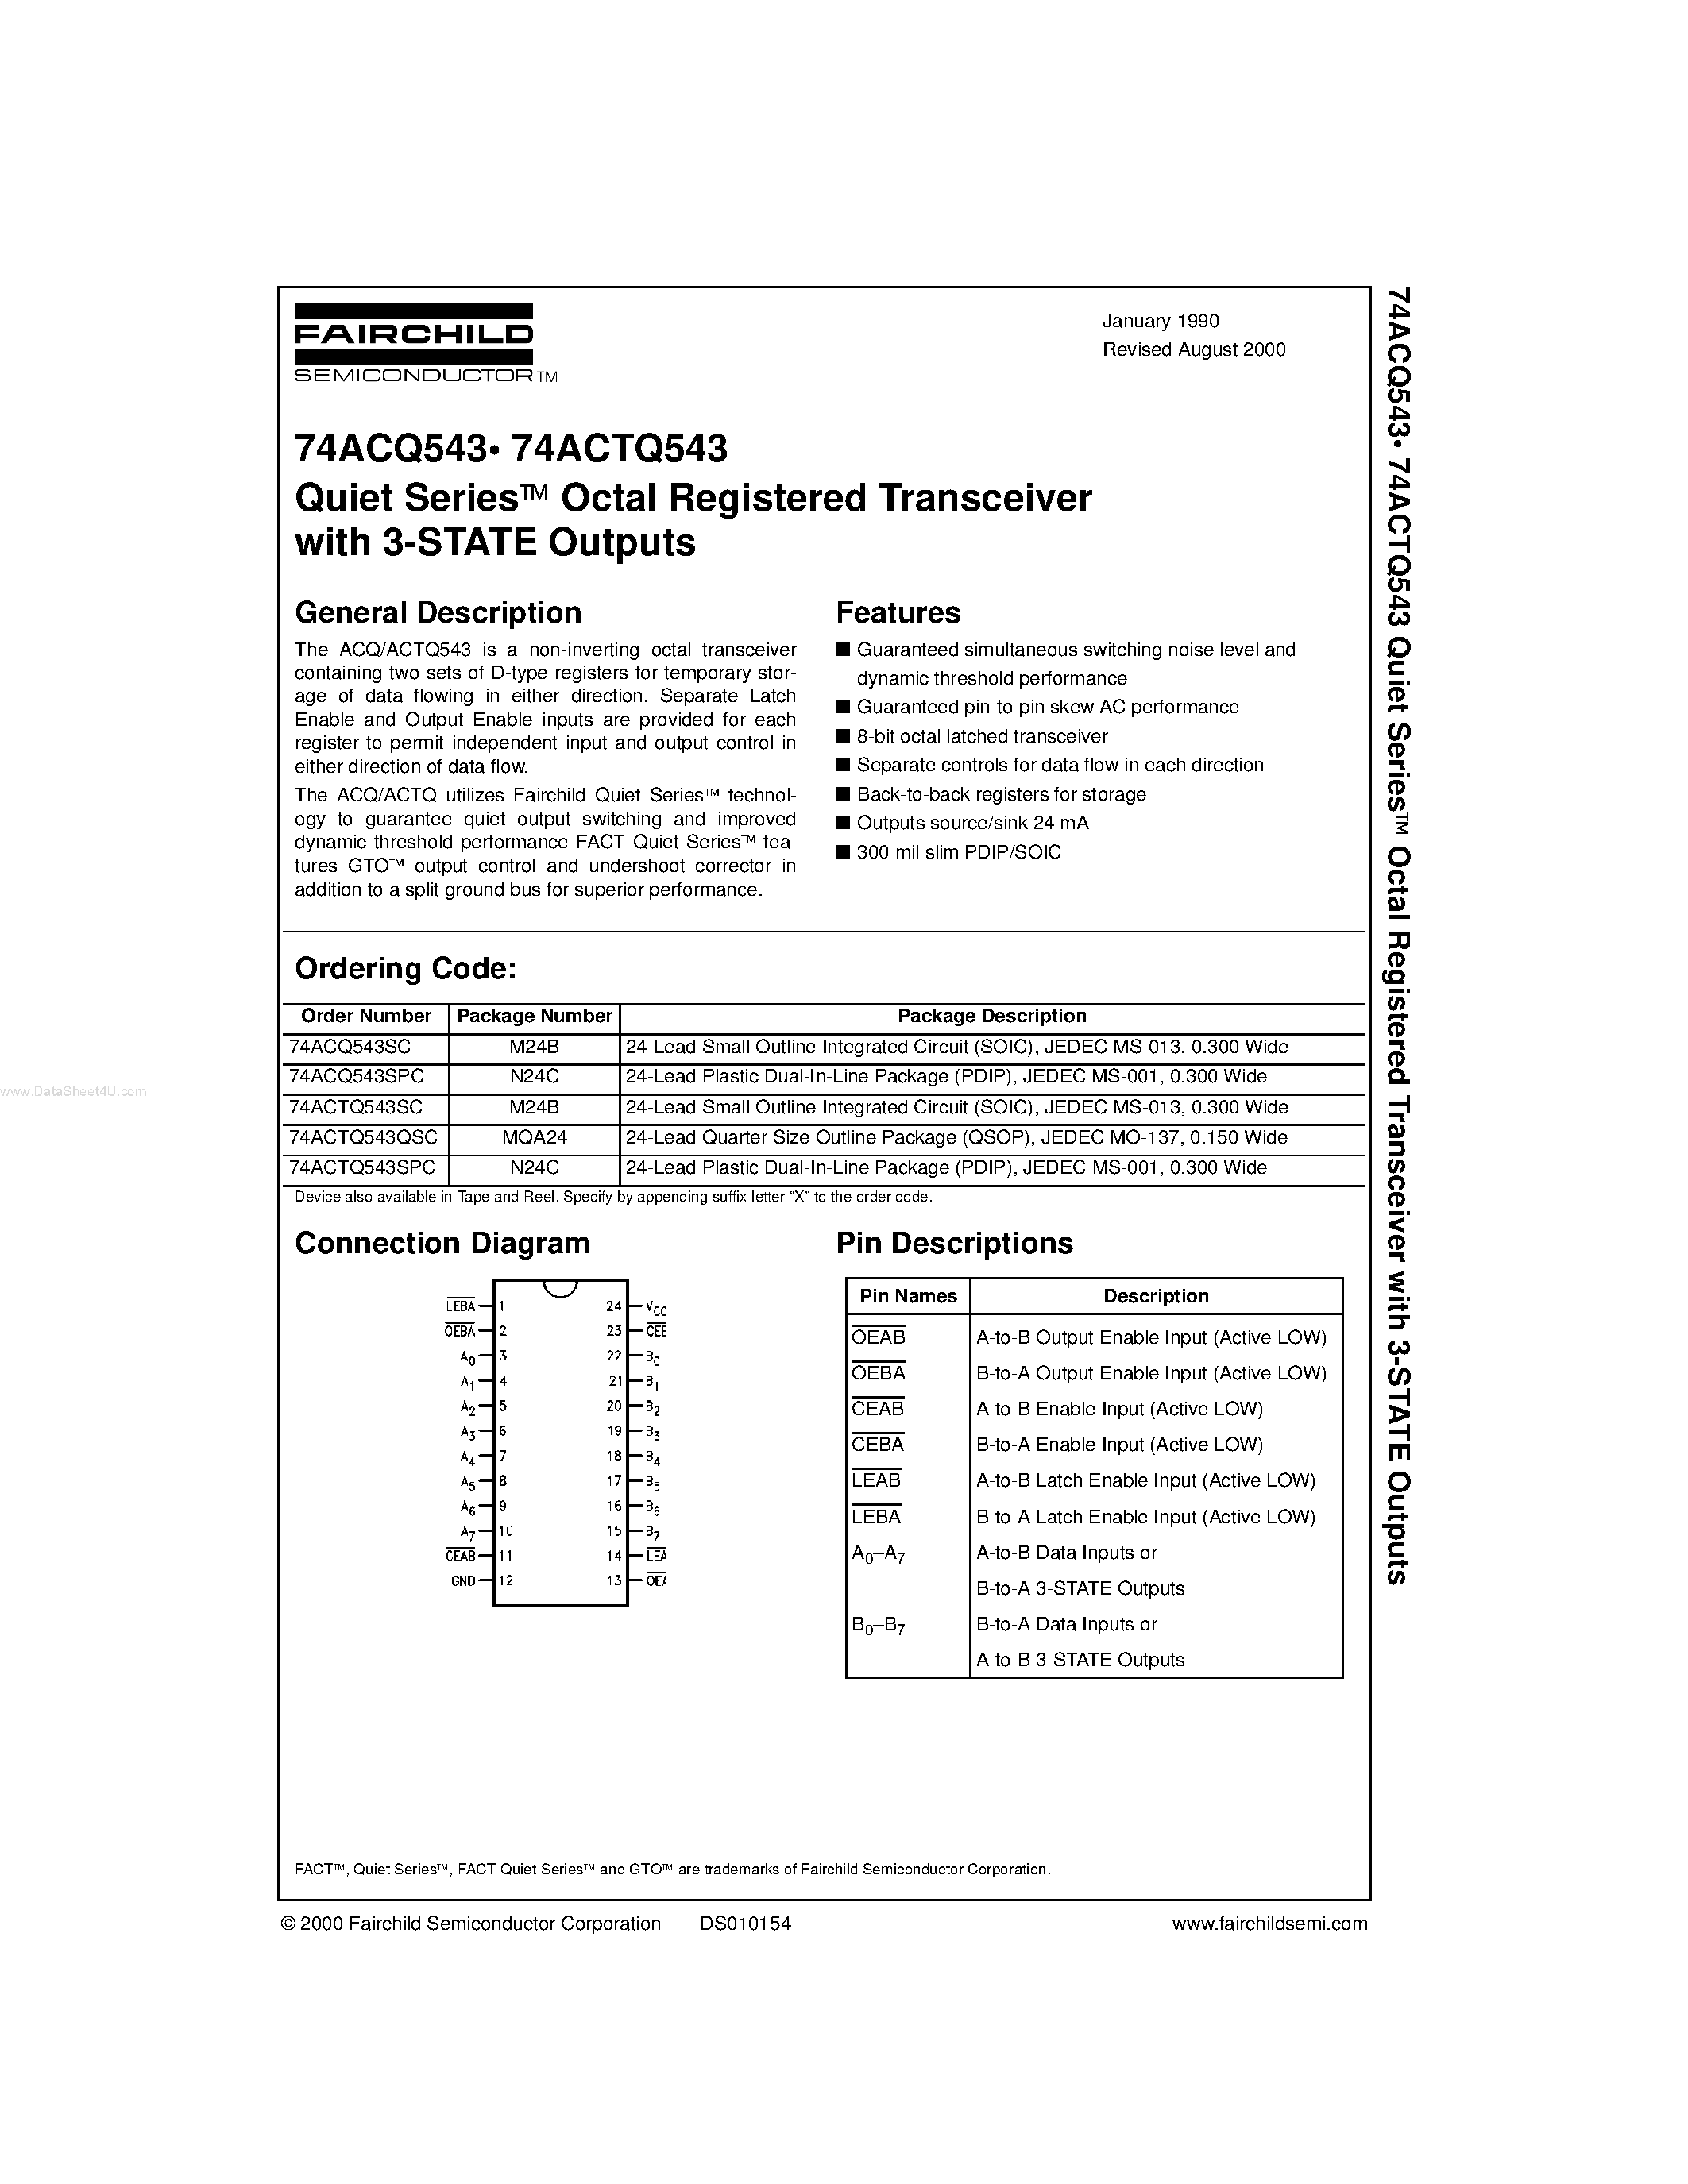 Datasheet 74ACTQ543SPC - Quiet Series Octal Registered Transceiver with 3-STATE Outputs page 1